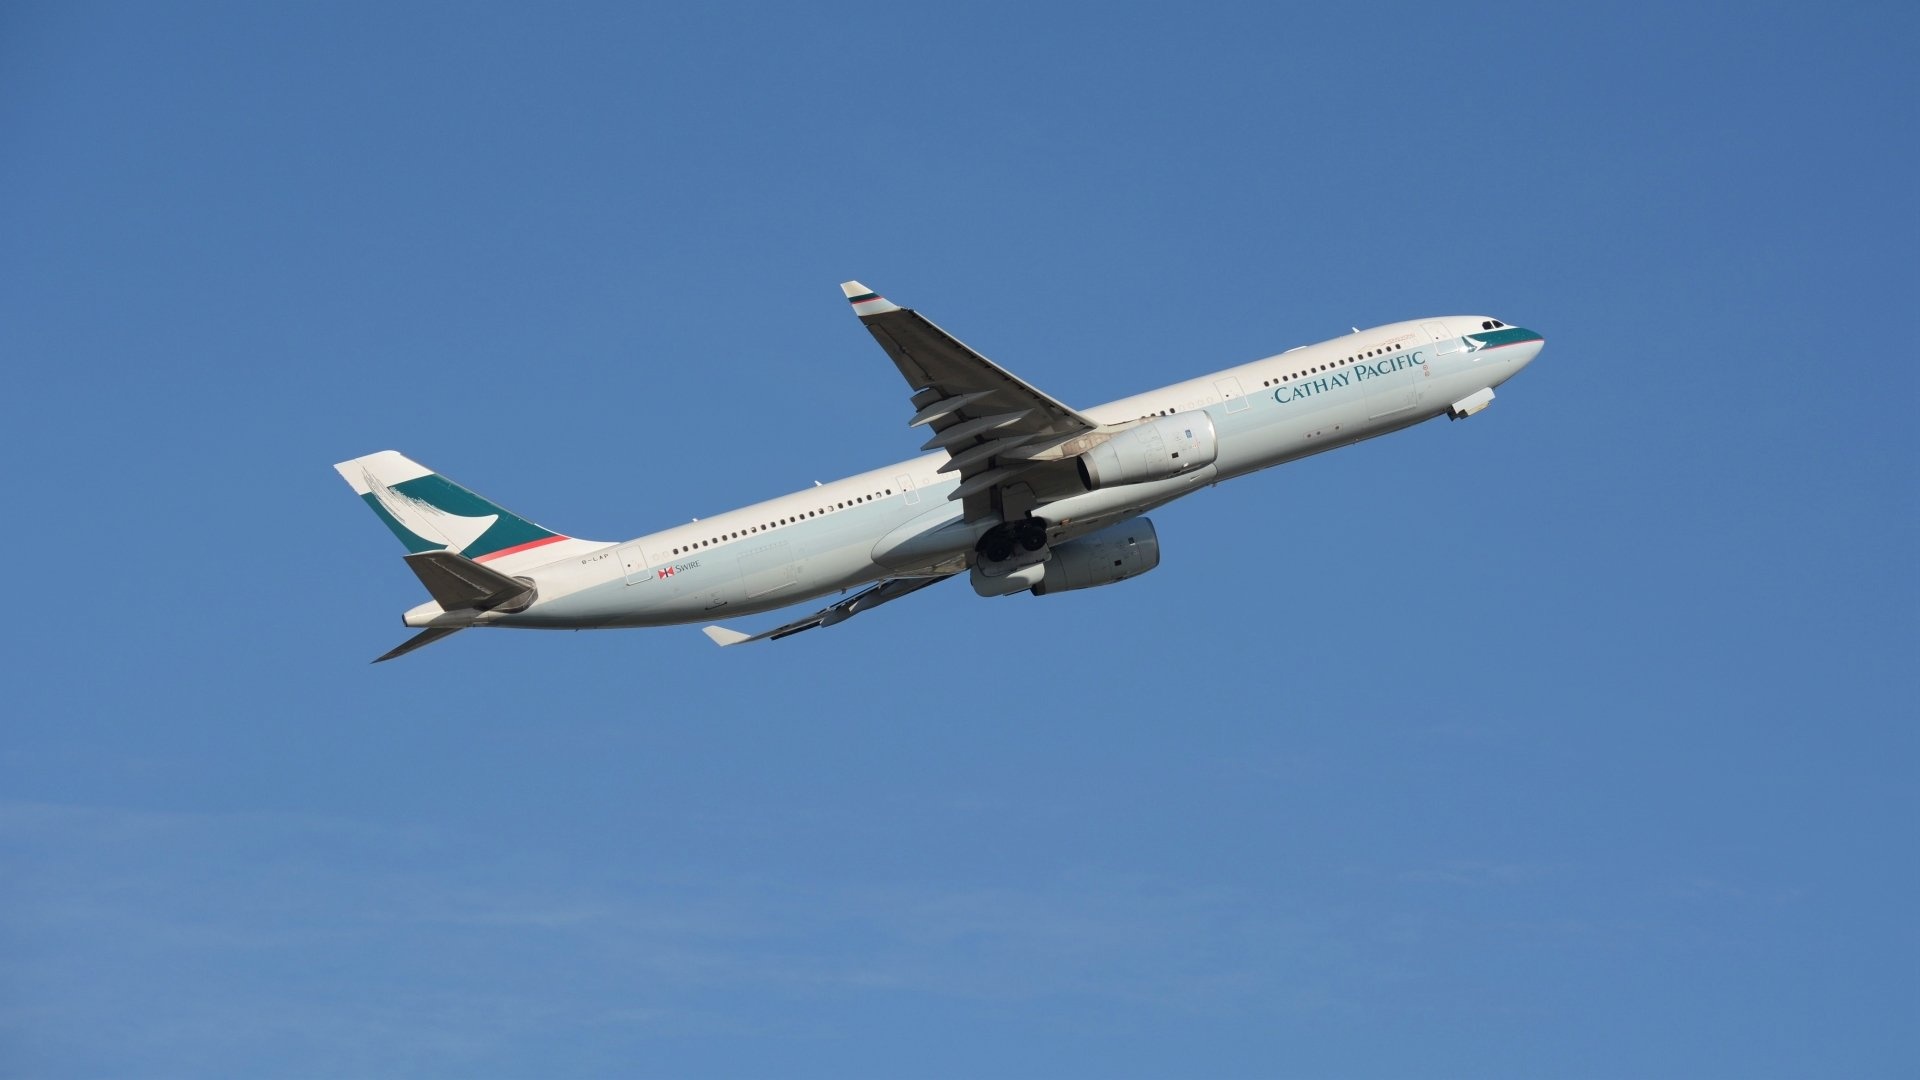 Cathay Pacific, 4K Airbus A330 wallpapers, 1920x1080 Full HD Desktop